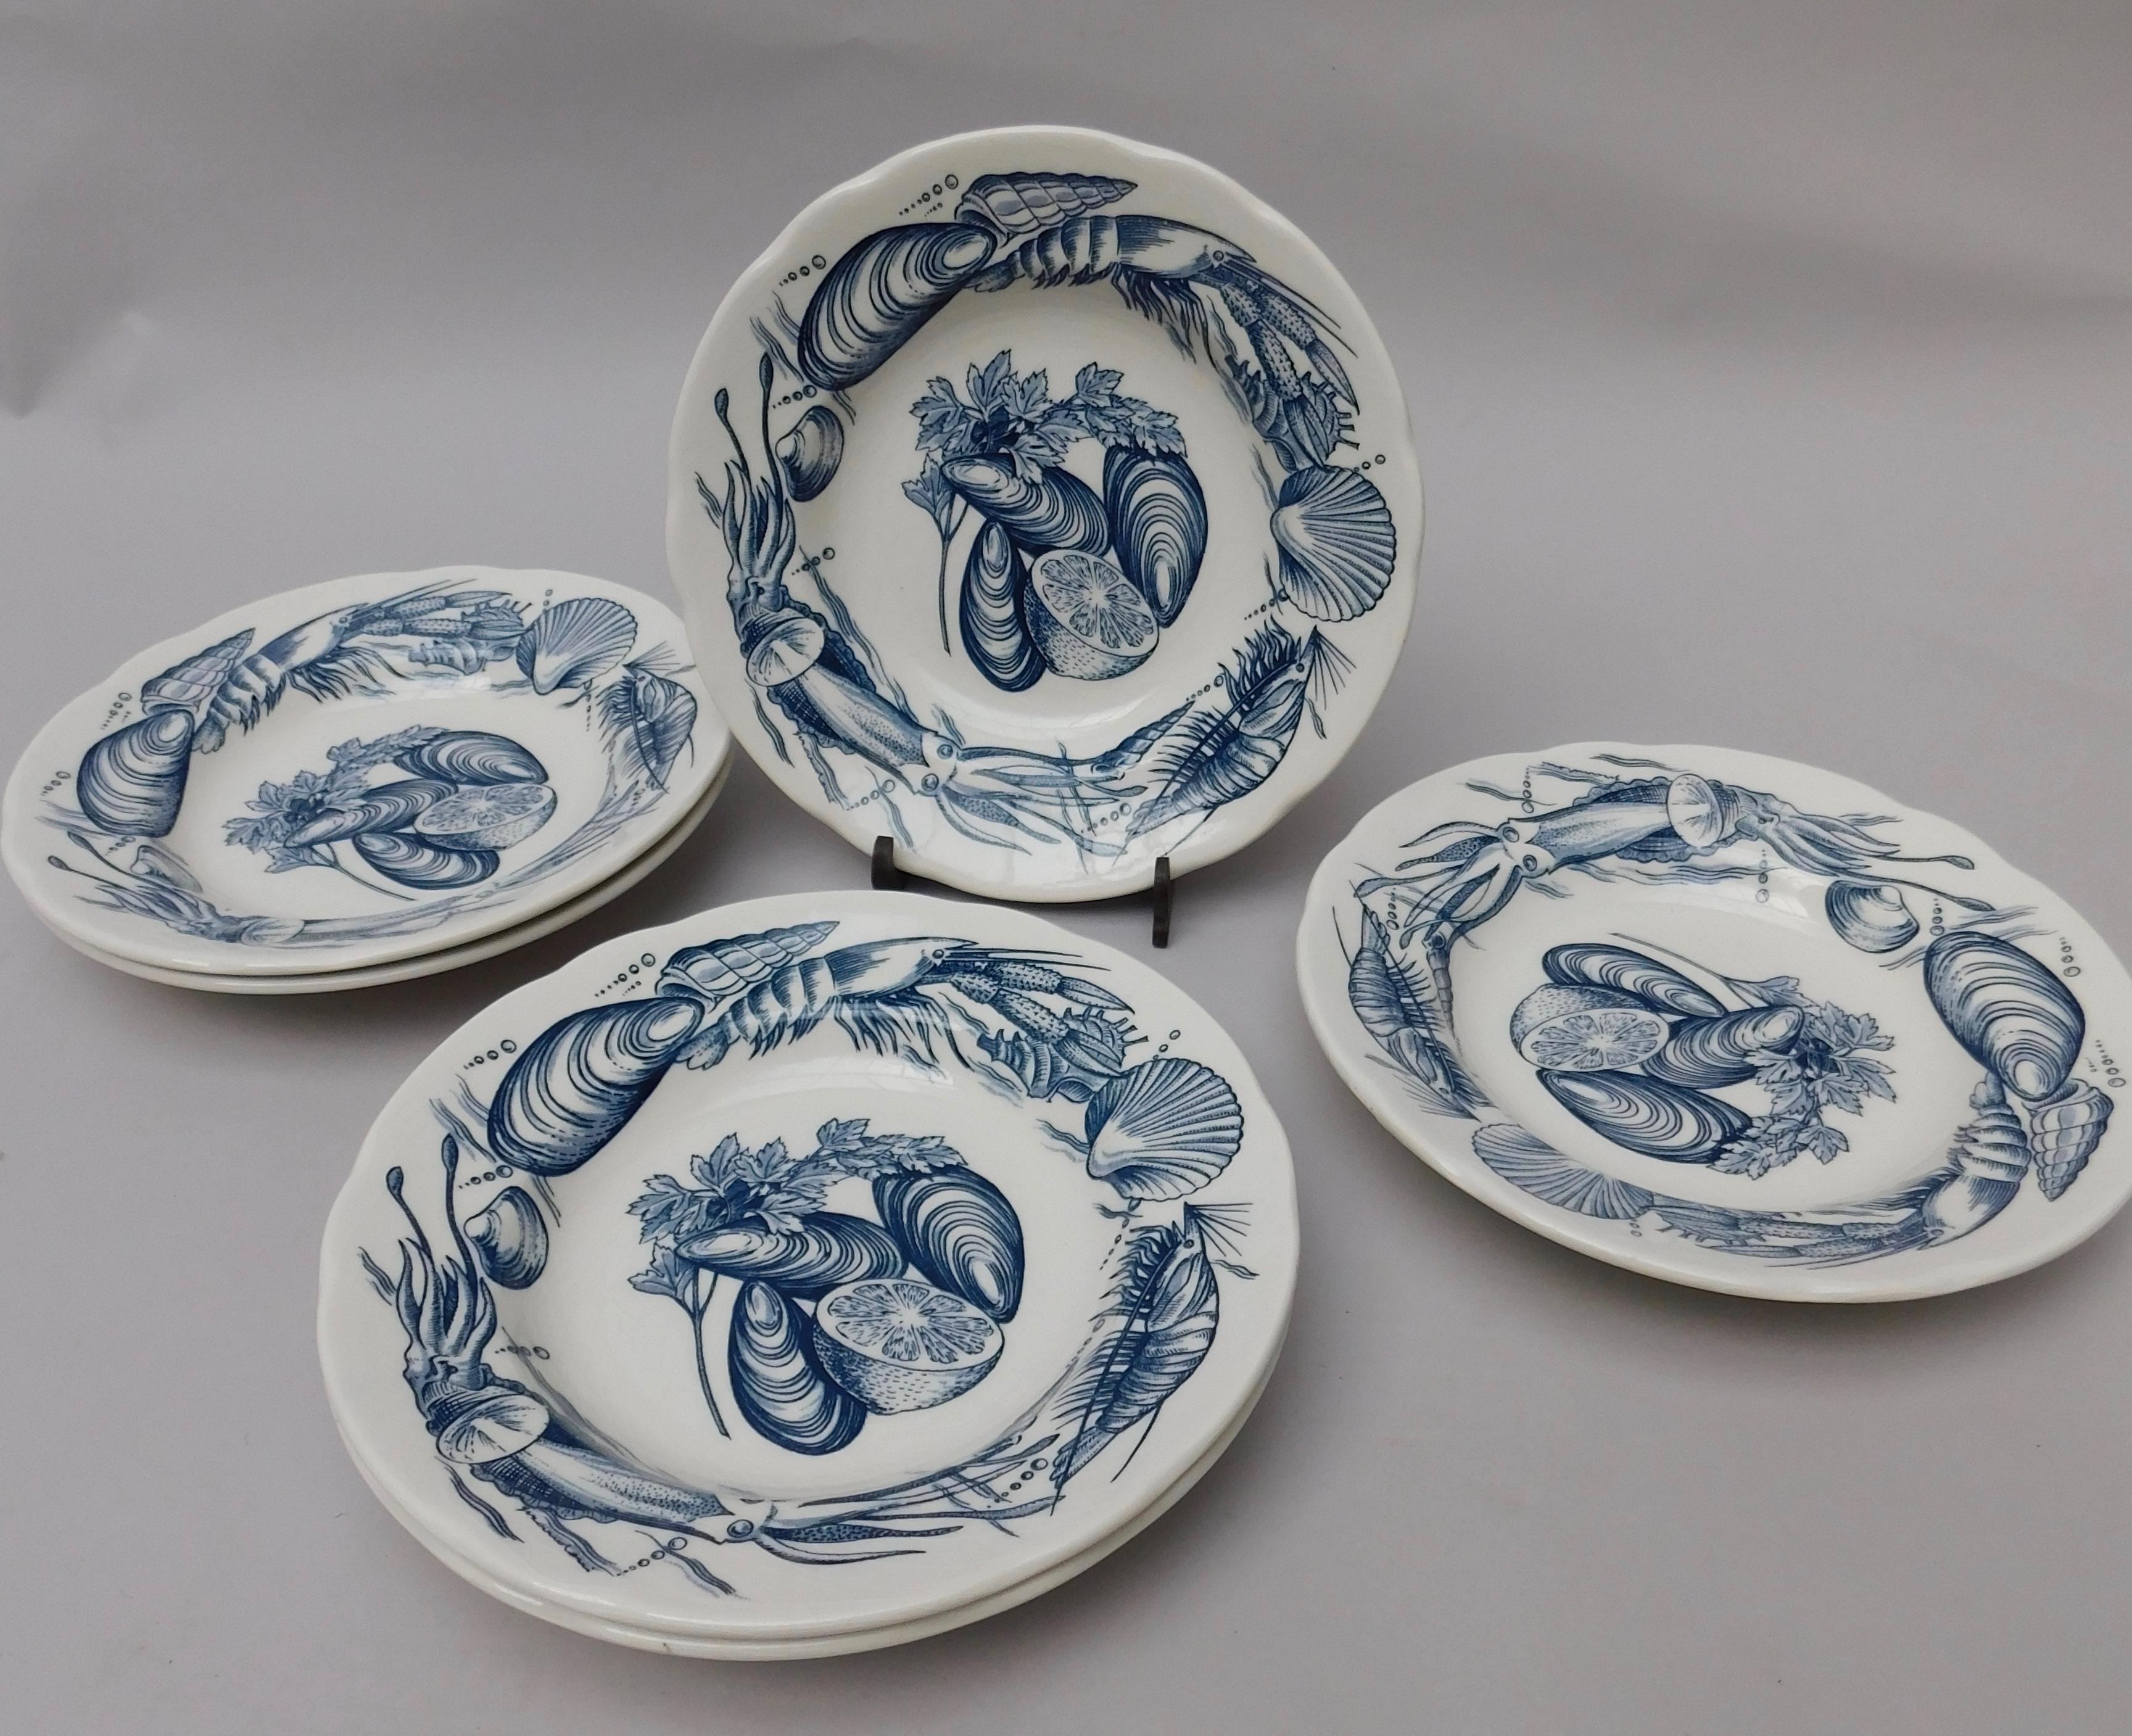 A set of six vintage English ironstone soup bowls with glazed transfer design of shellfish. All in excellent condition, circa 1970.